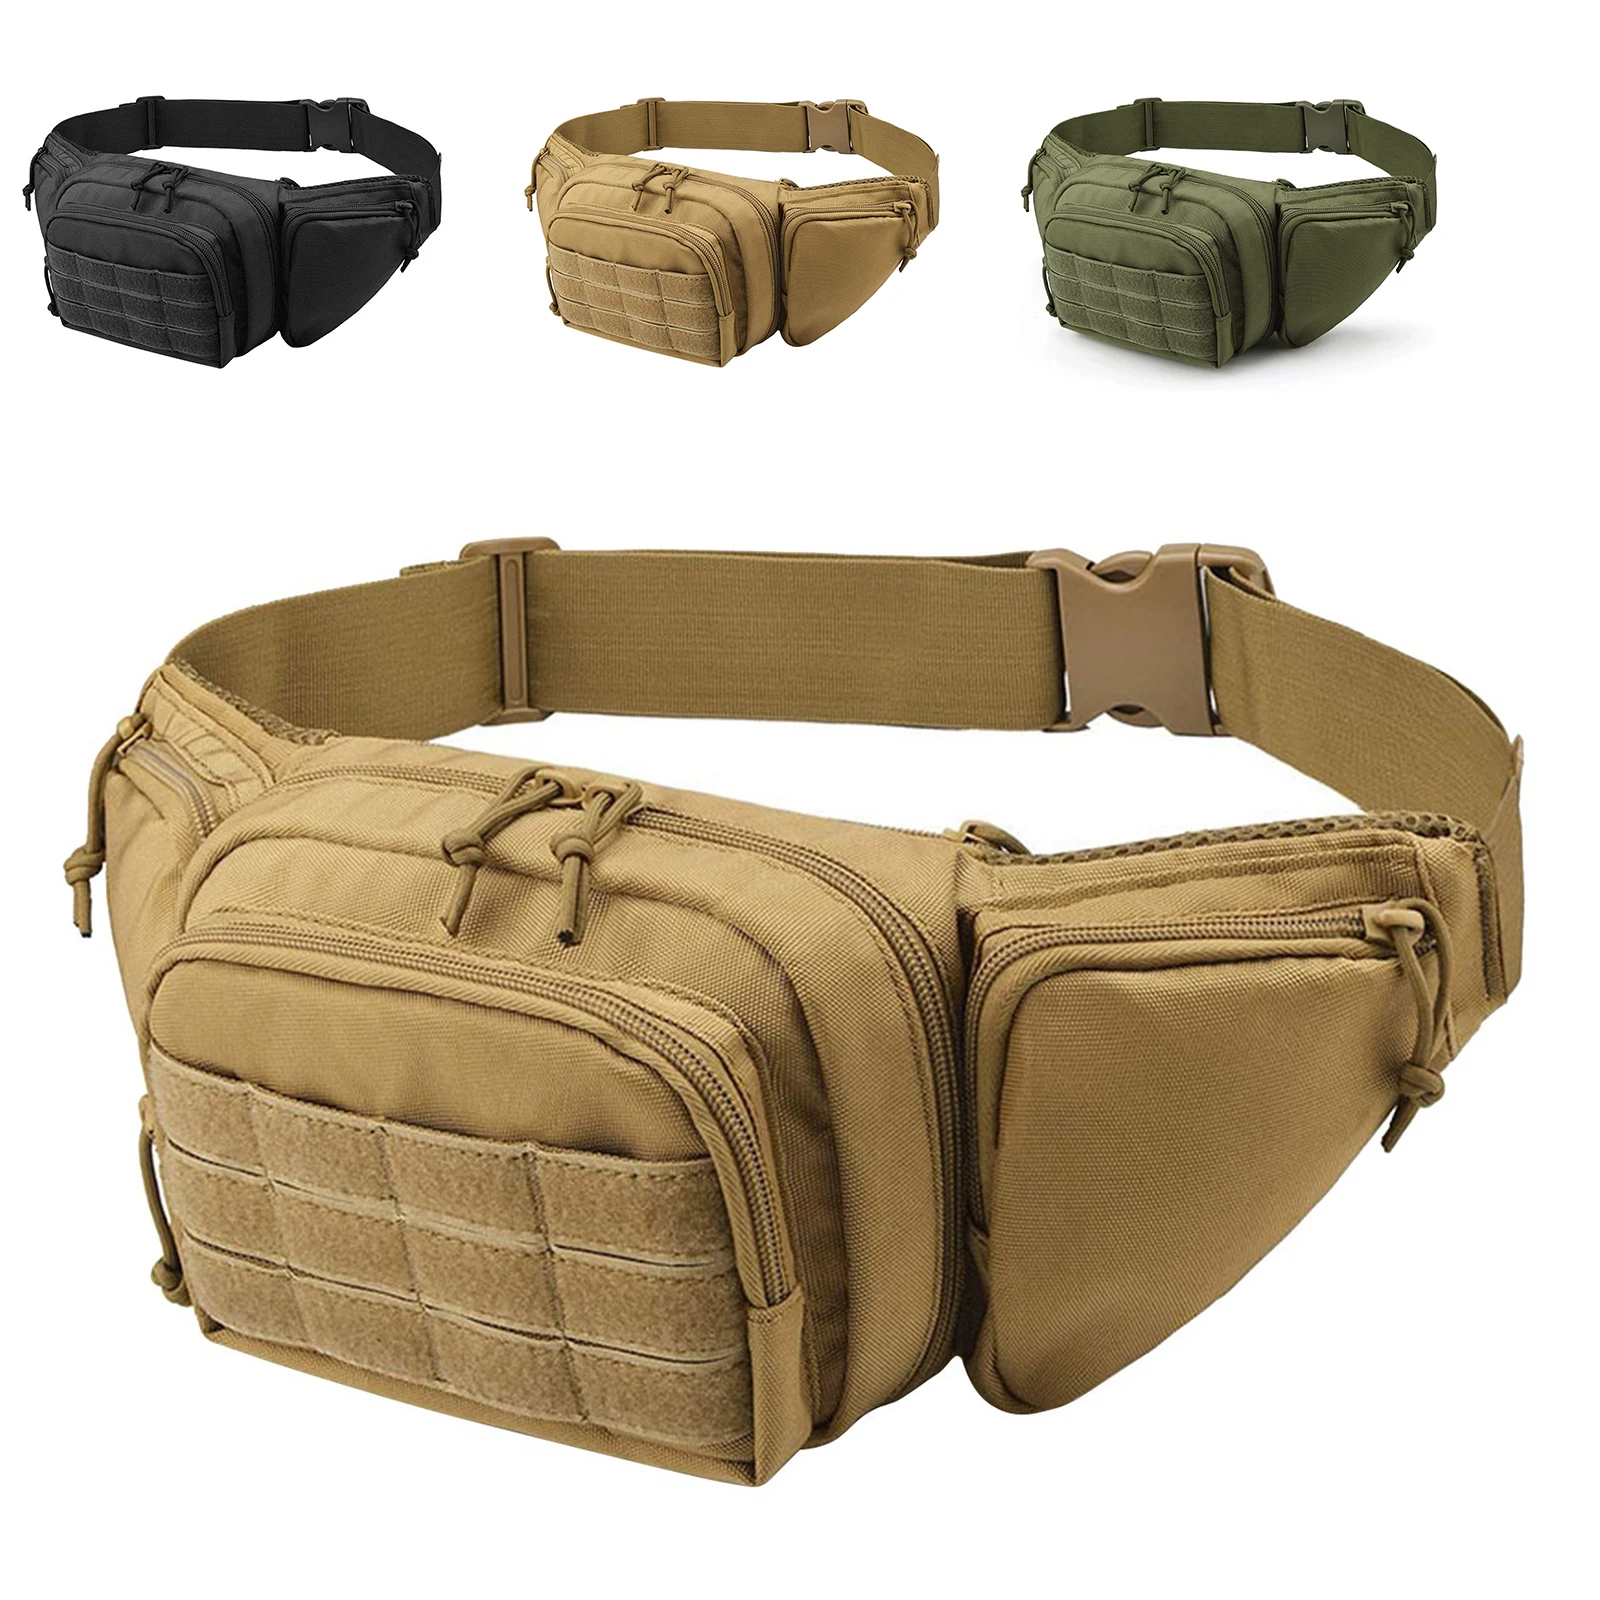 Concealed Carry Fanny Pack Holster Tactical Military Pistol Waist Pouch Gun Bag 